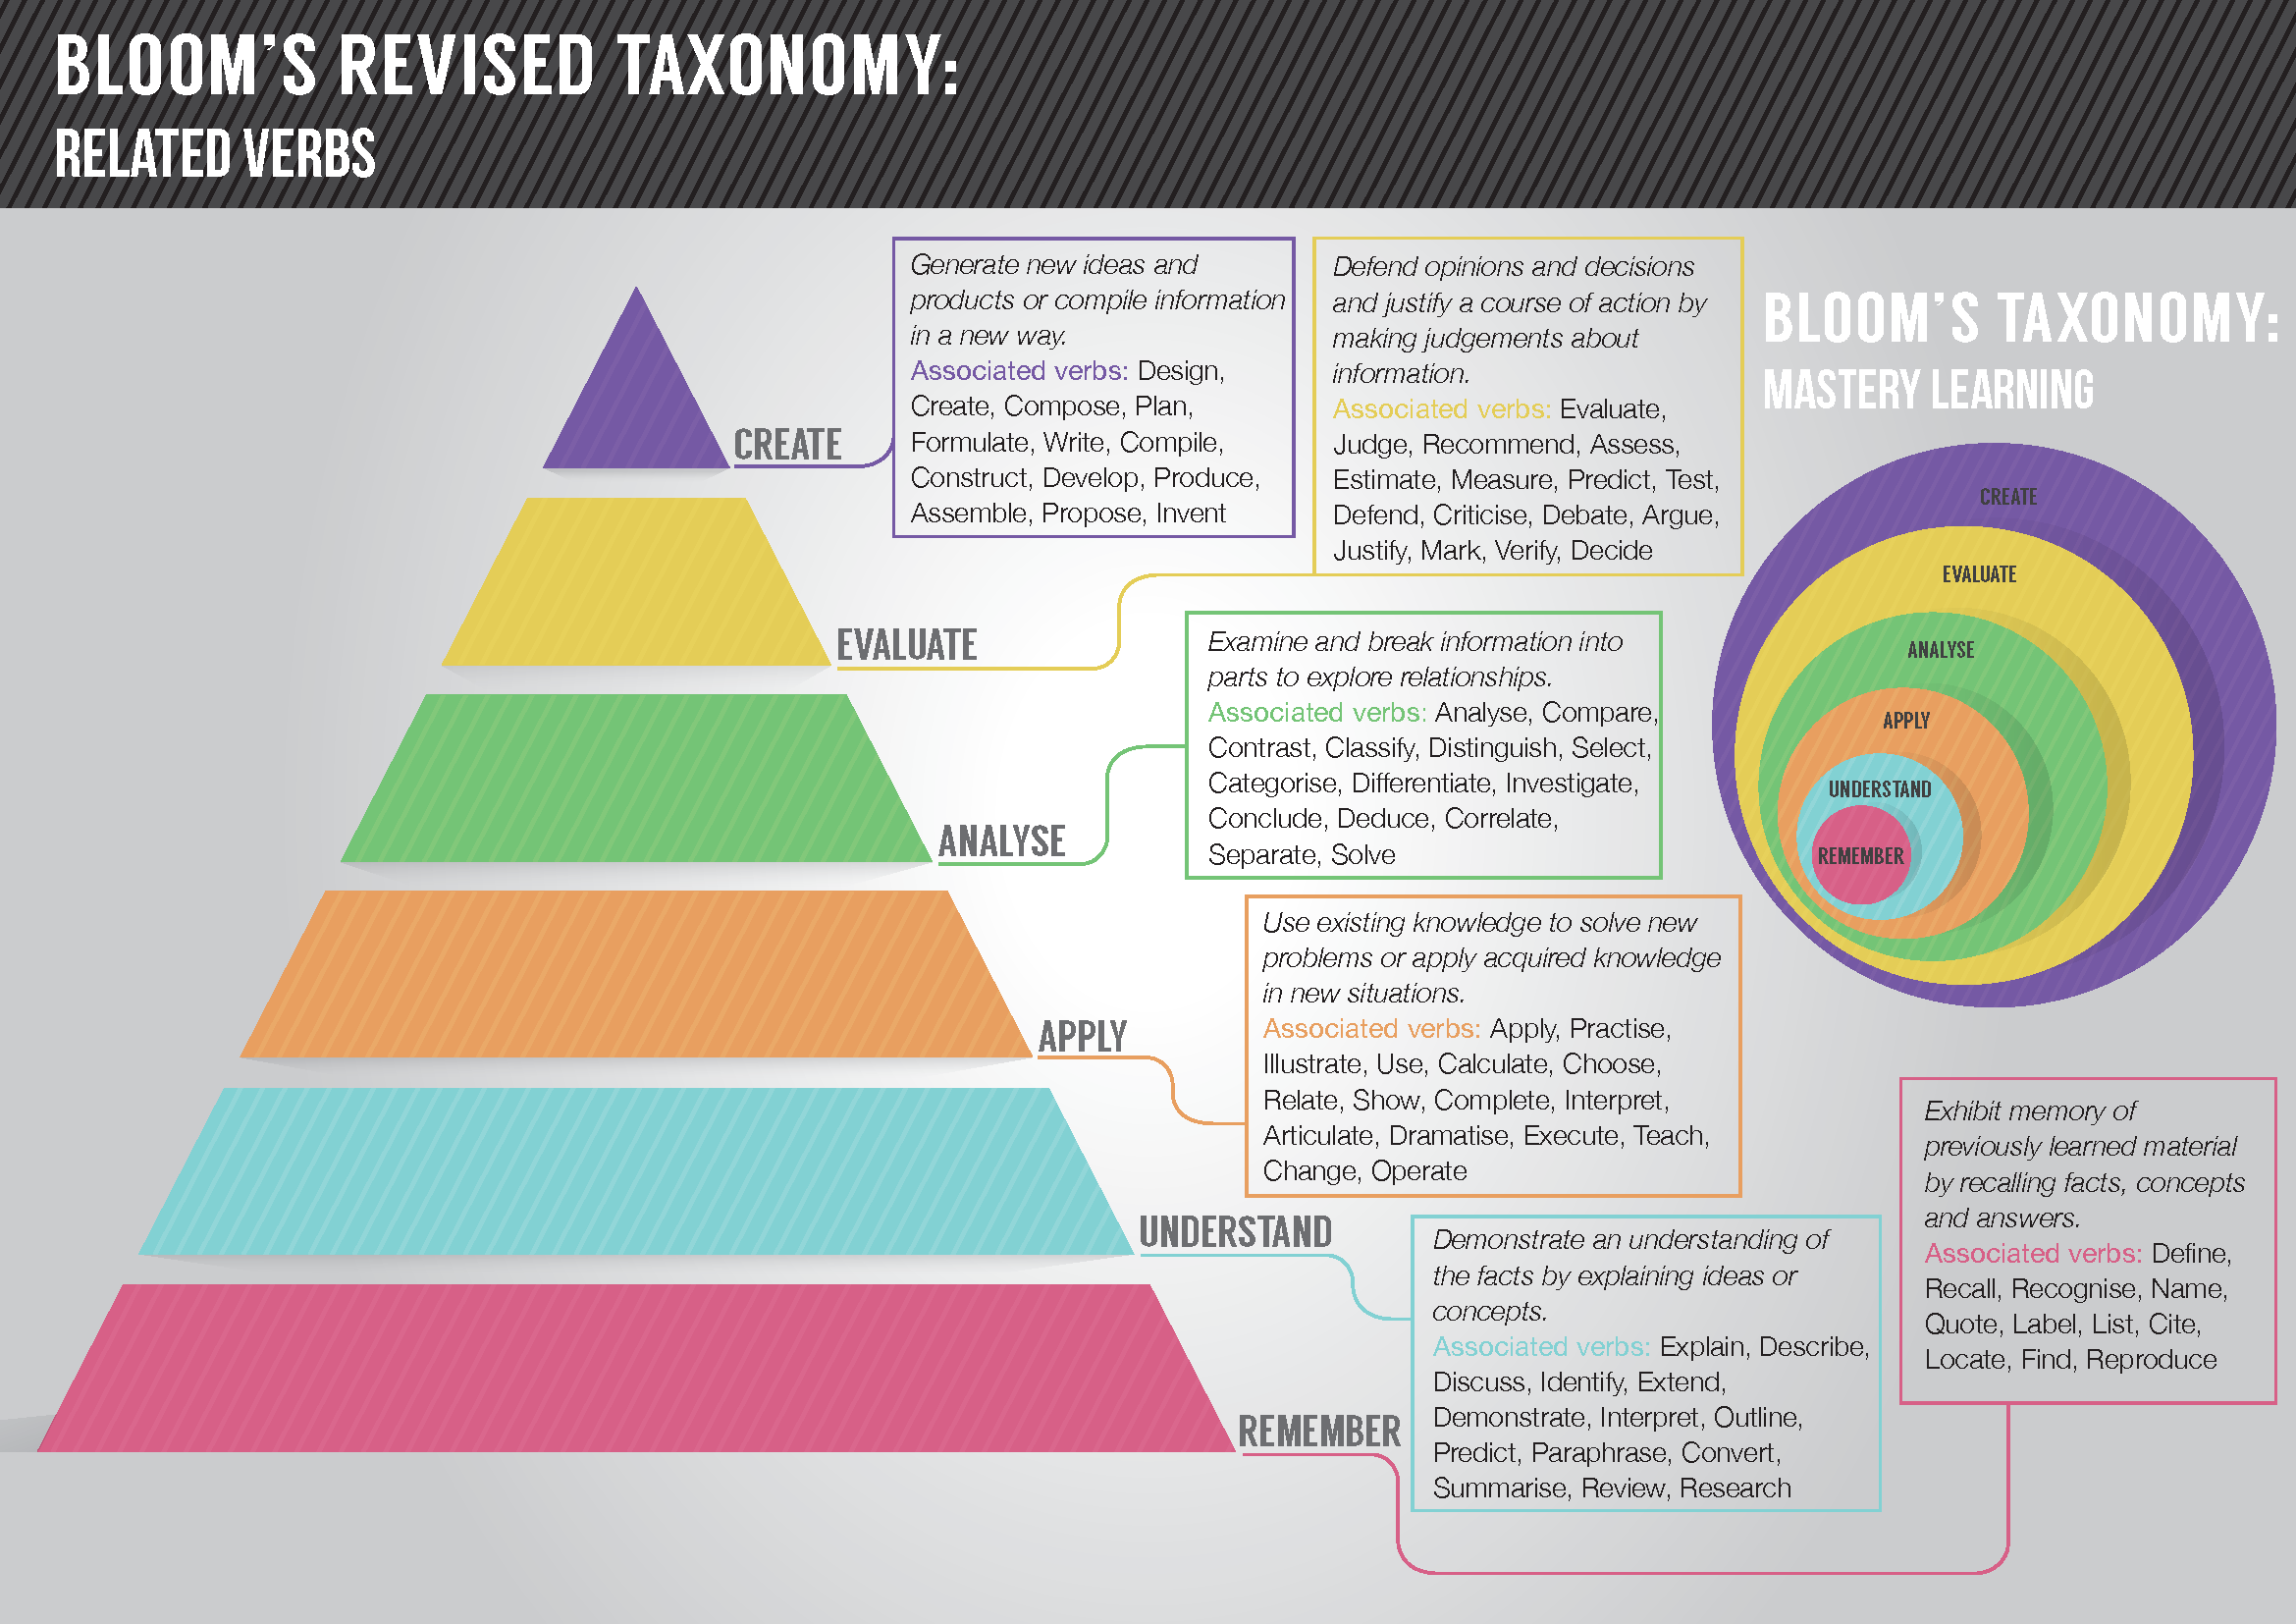 Knowledge commons Bloom's taxonomy from GetSmarter